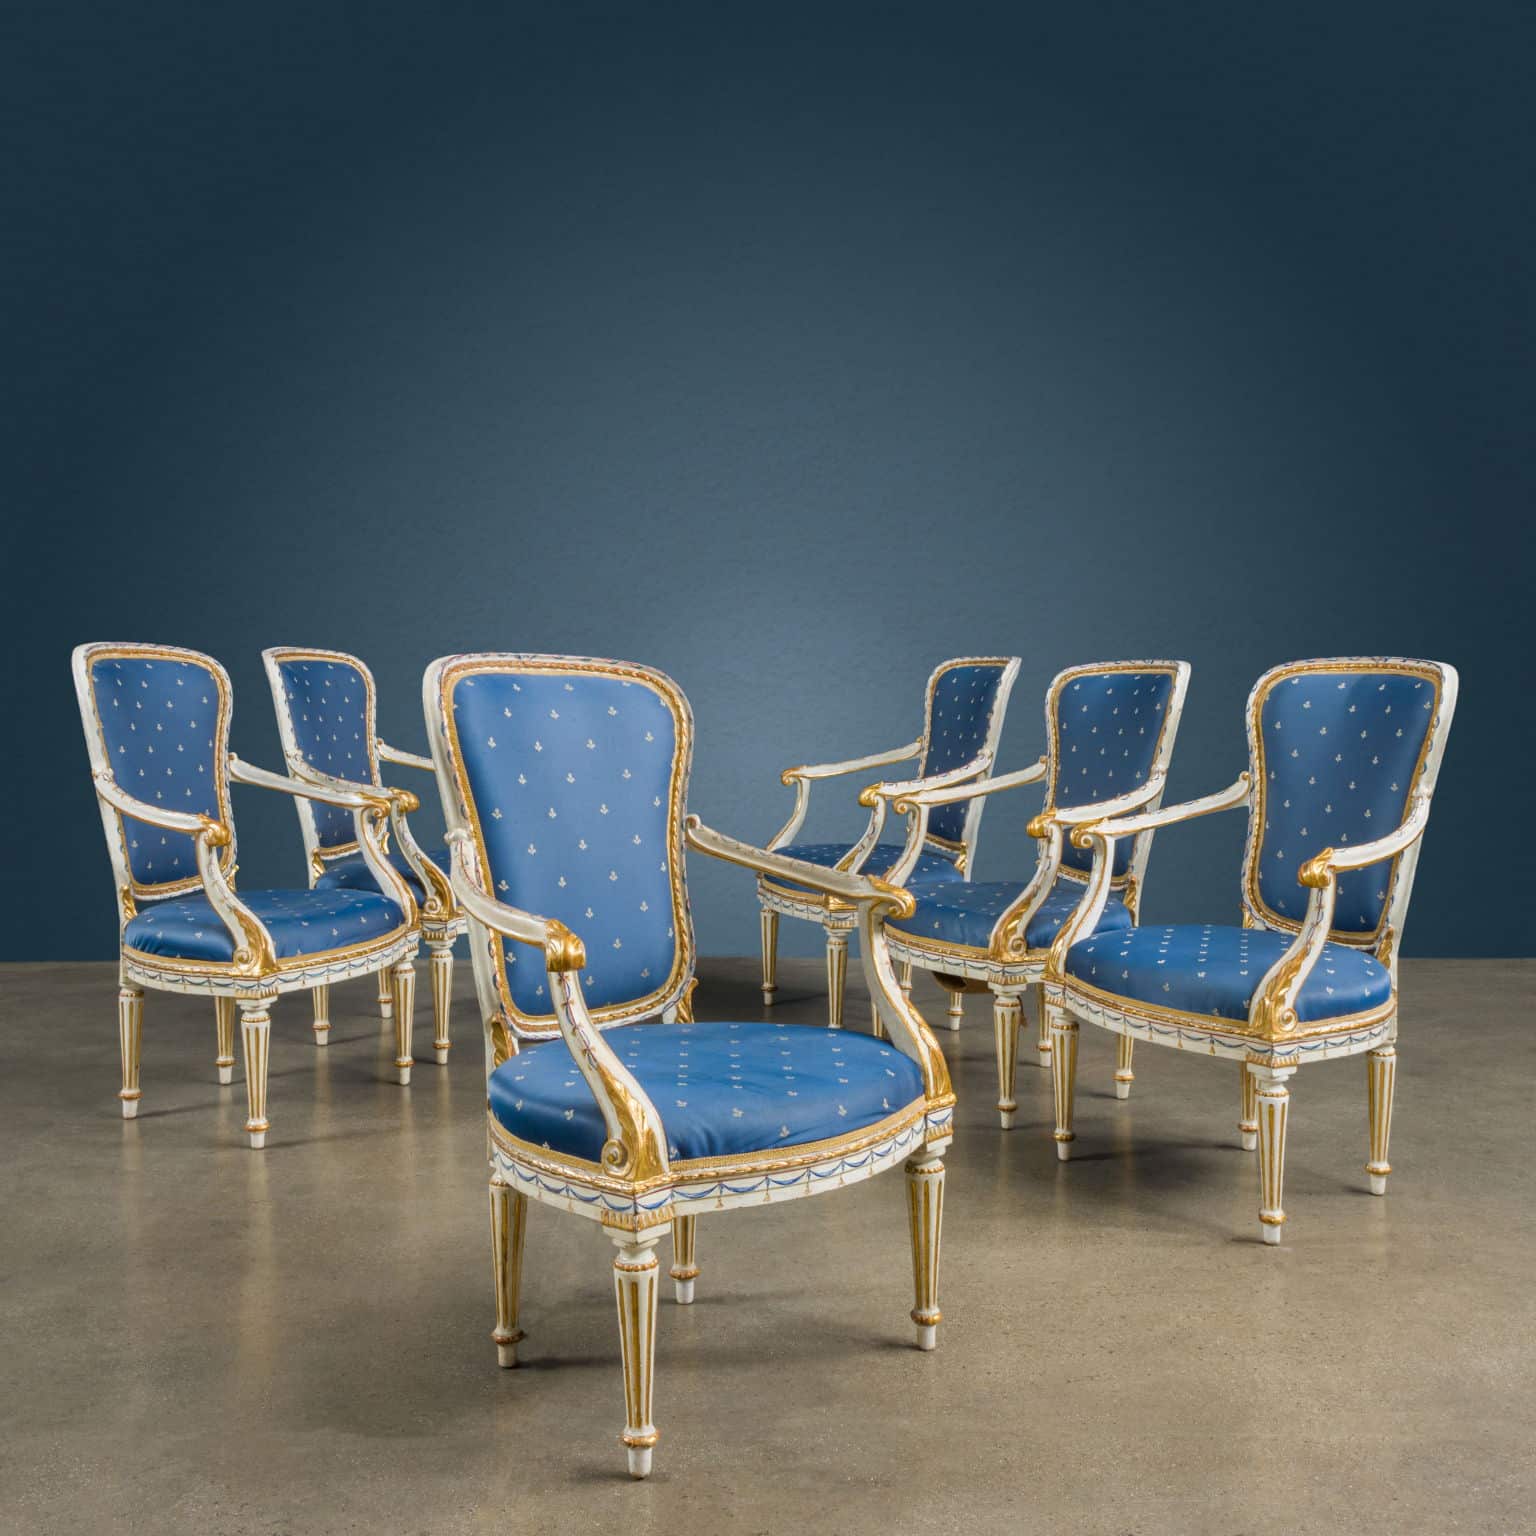 Six lacquered armchairs. Venice, last quarter of the 18th century